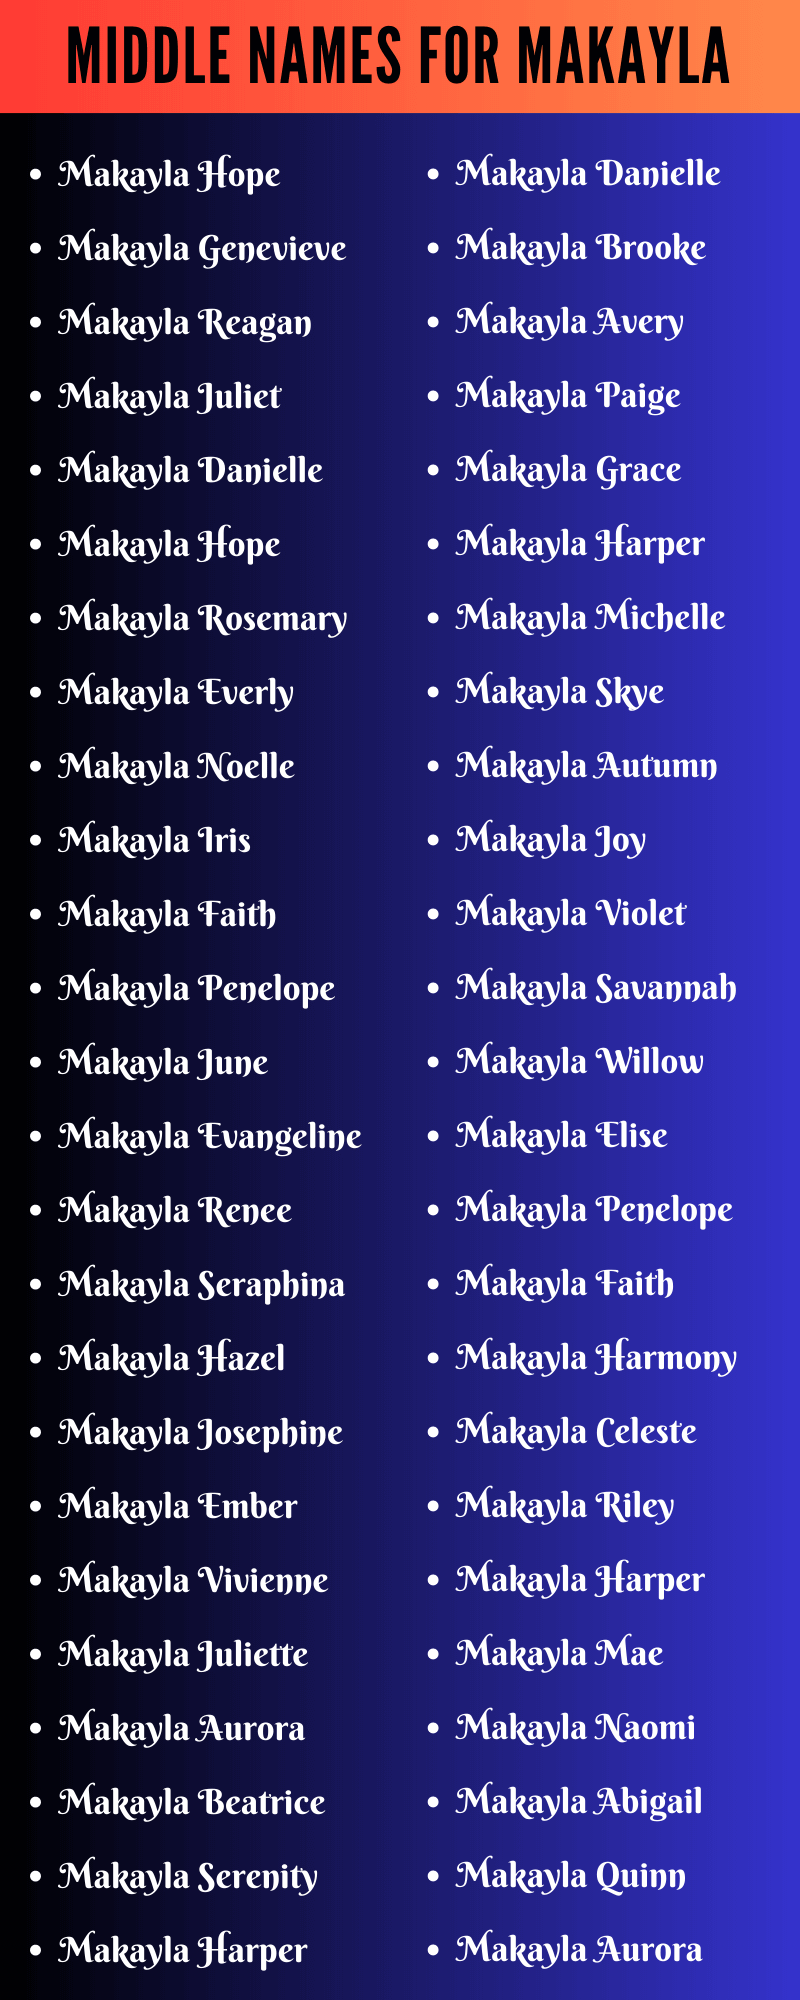 Middle Names For Makayla